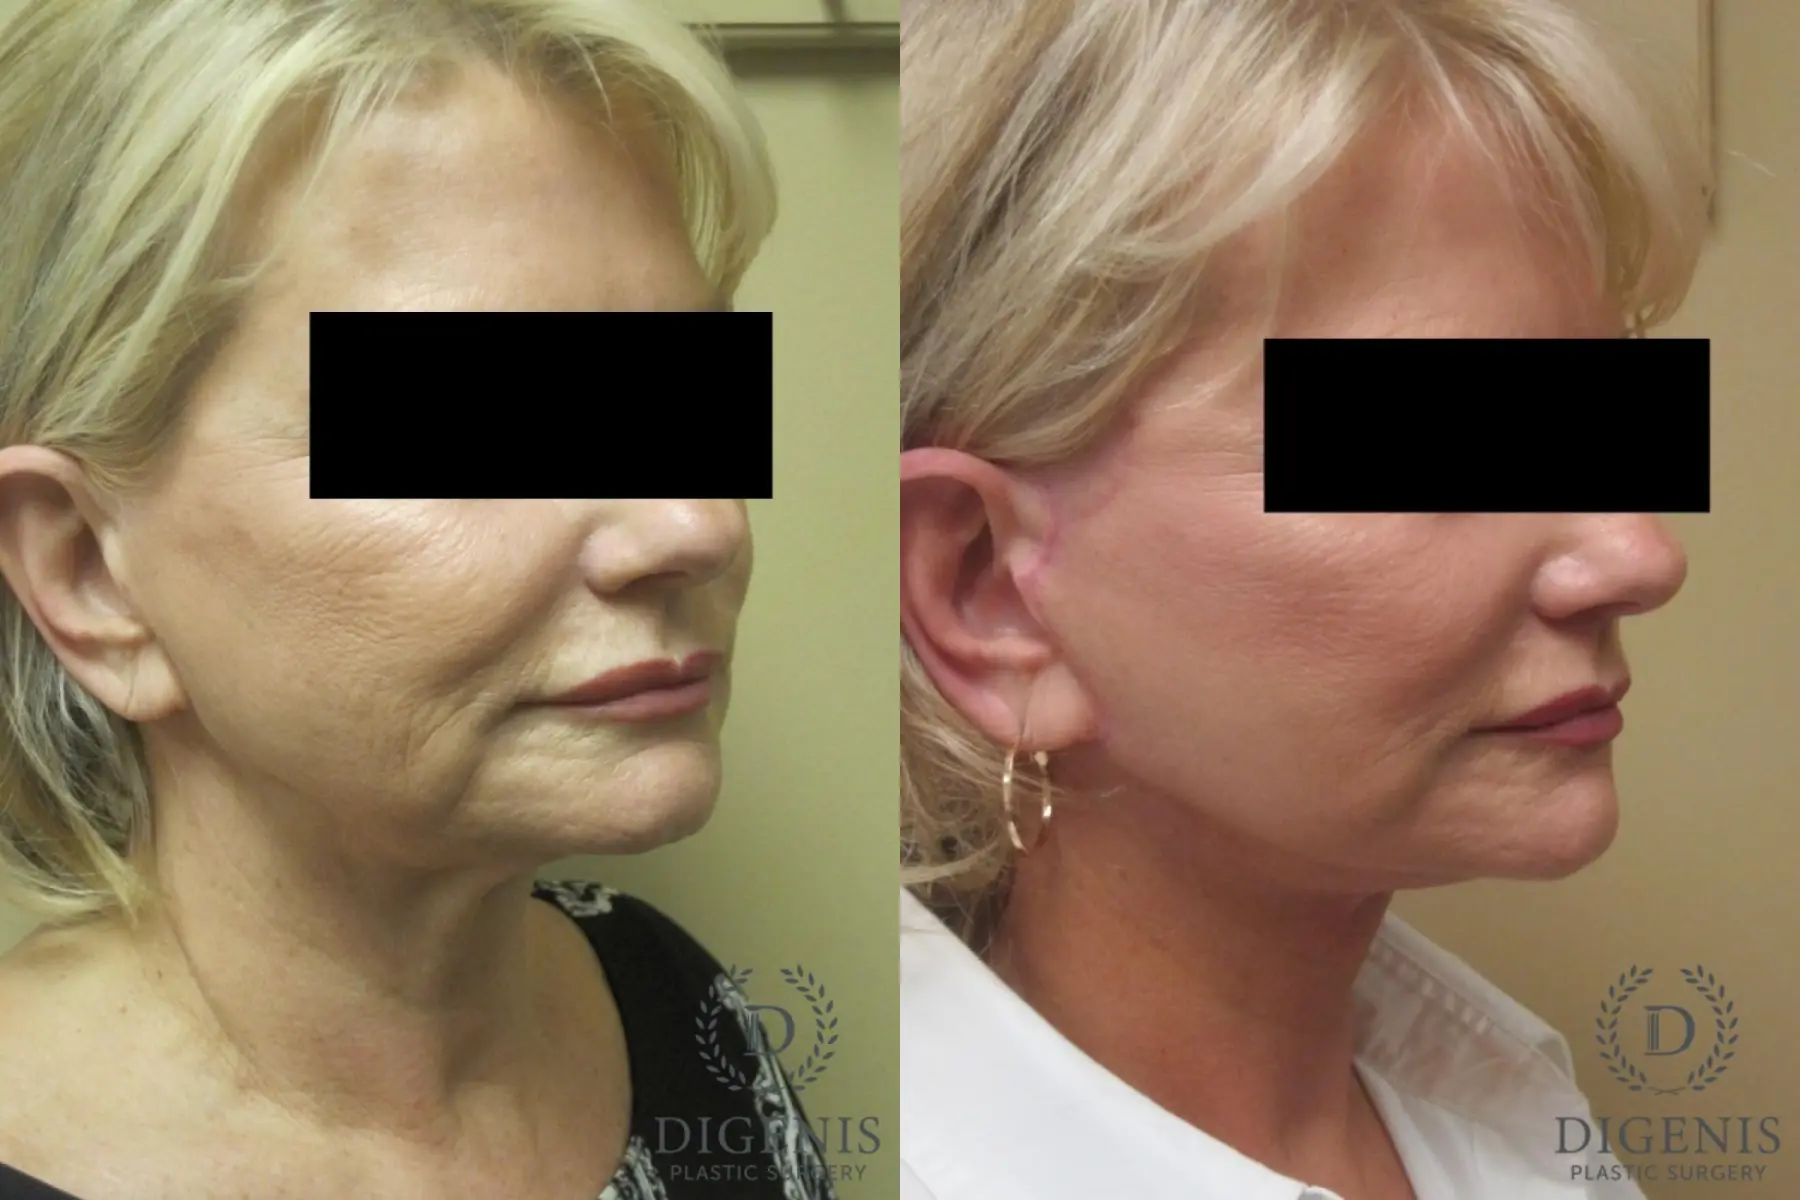 Facelift: Patient 15 - Before and After 2